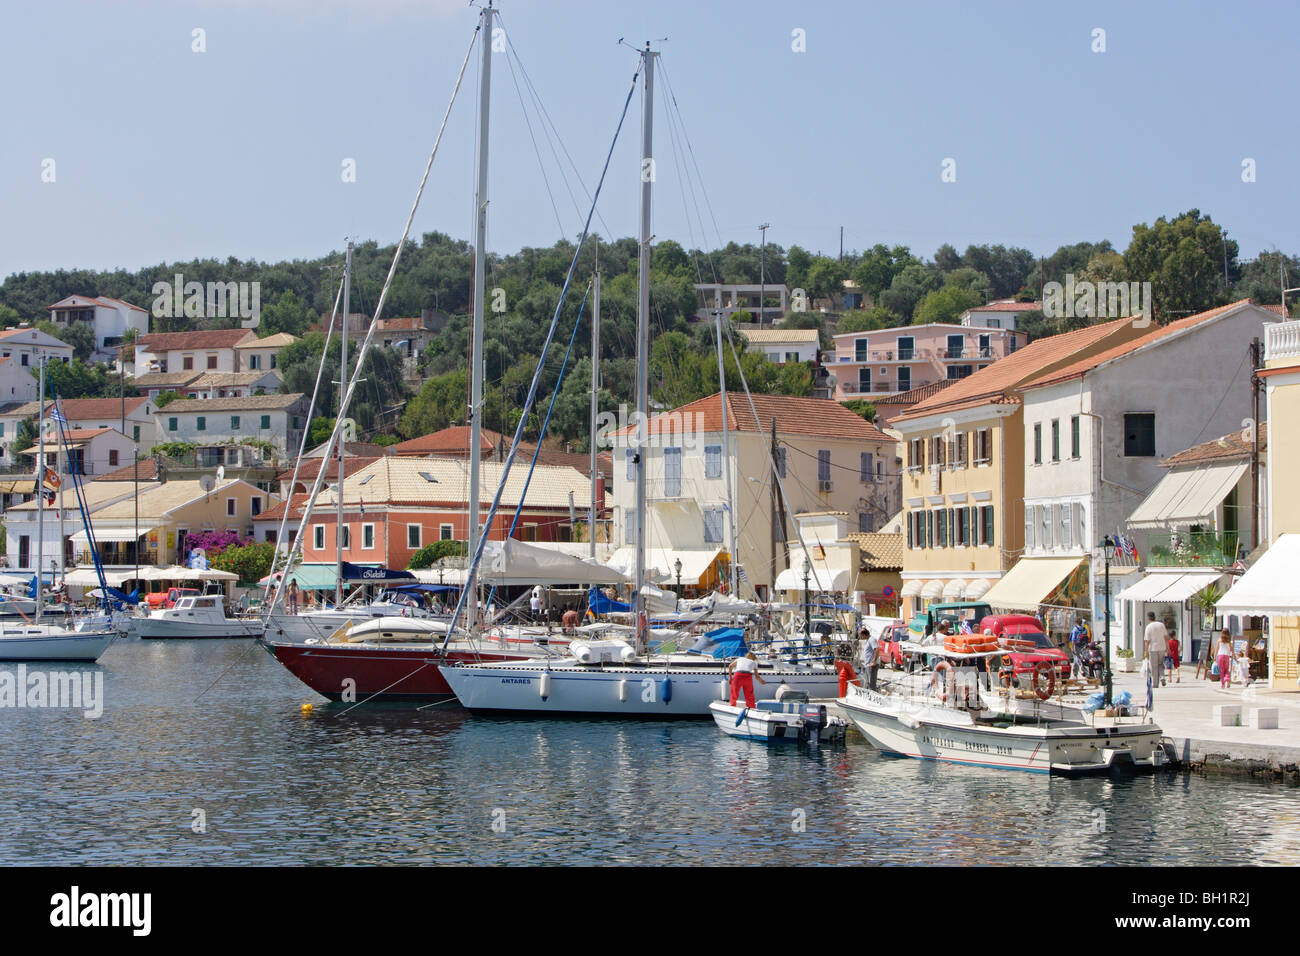 Boats are moored in Gaios harbour, Paxos, Ionian Islands, Greece Stock Photo